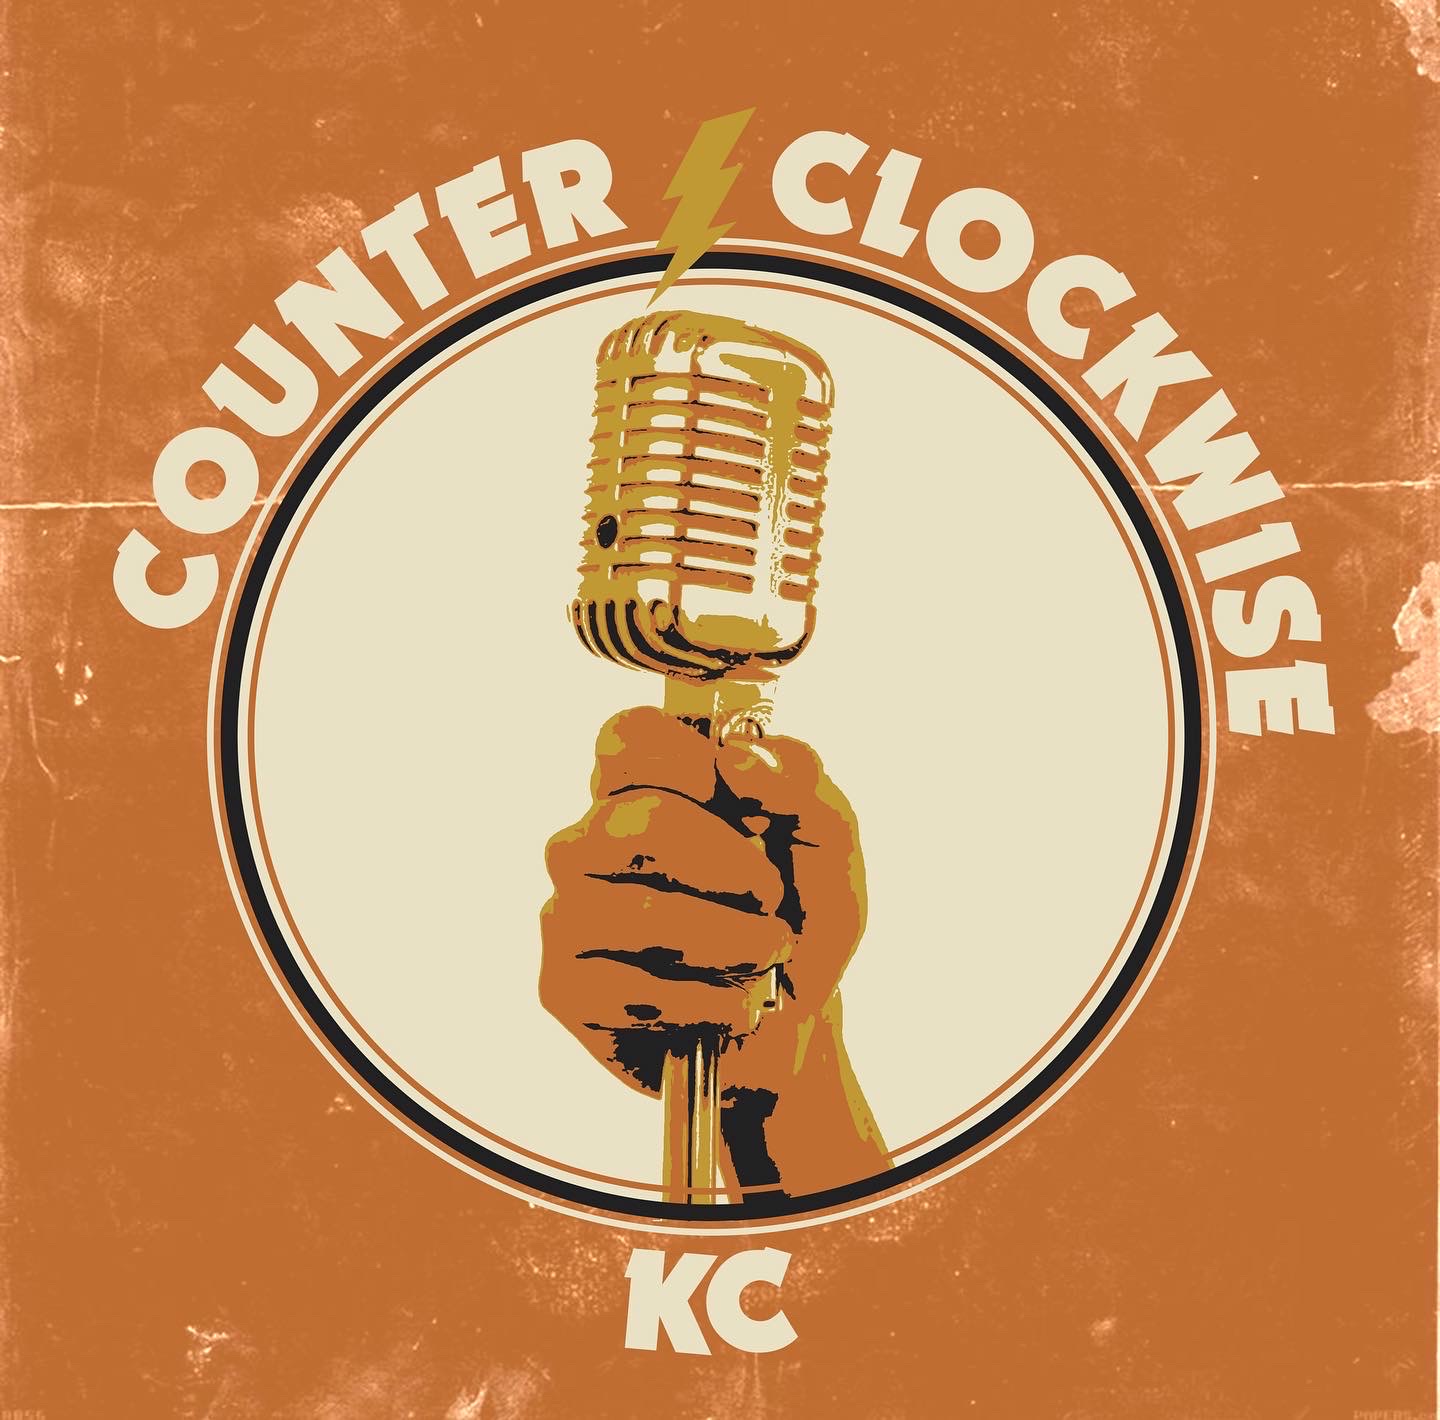 Art for CounterclockwiseKC Radio! by CCKC Radio